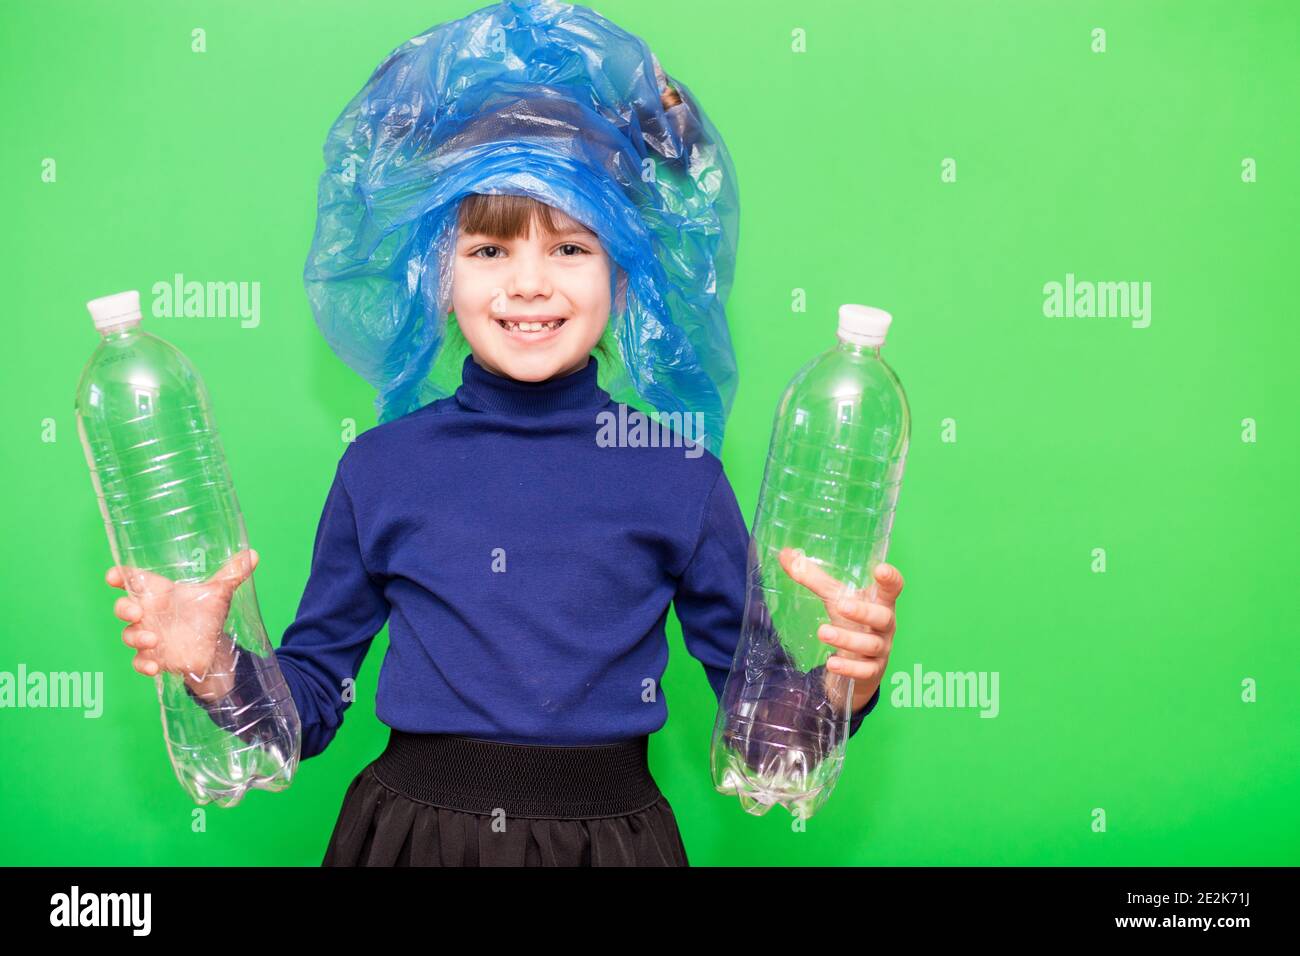 Girl hold trash bag and plastic bottle and shows interest in environmental issues isolated on green background. Child accustomed to bear responsibility for garbage since childhood. Plastic trash sorting concept Stock Photo